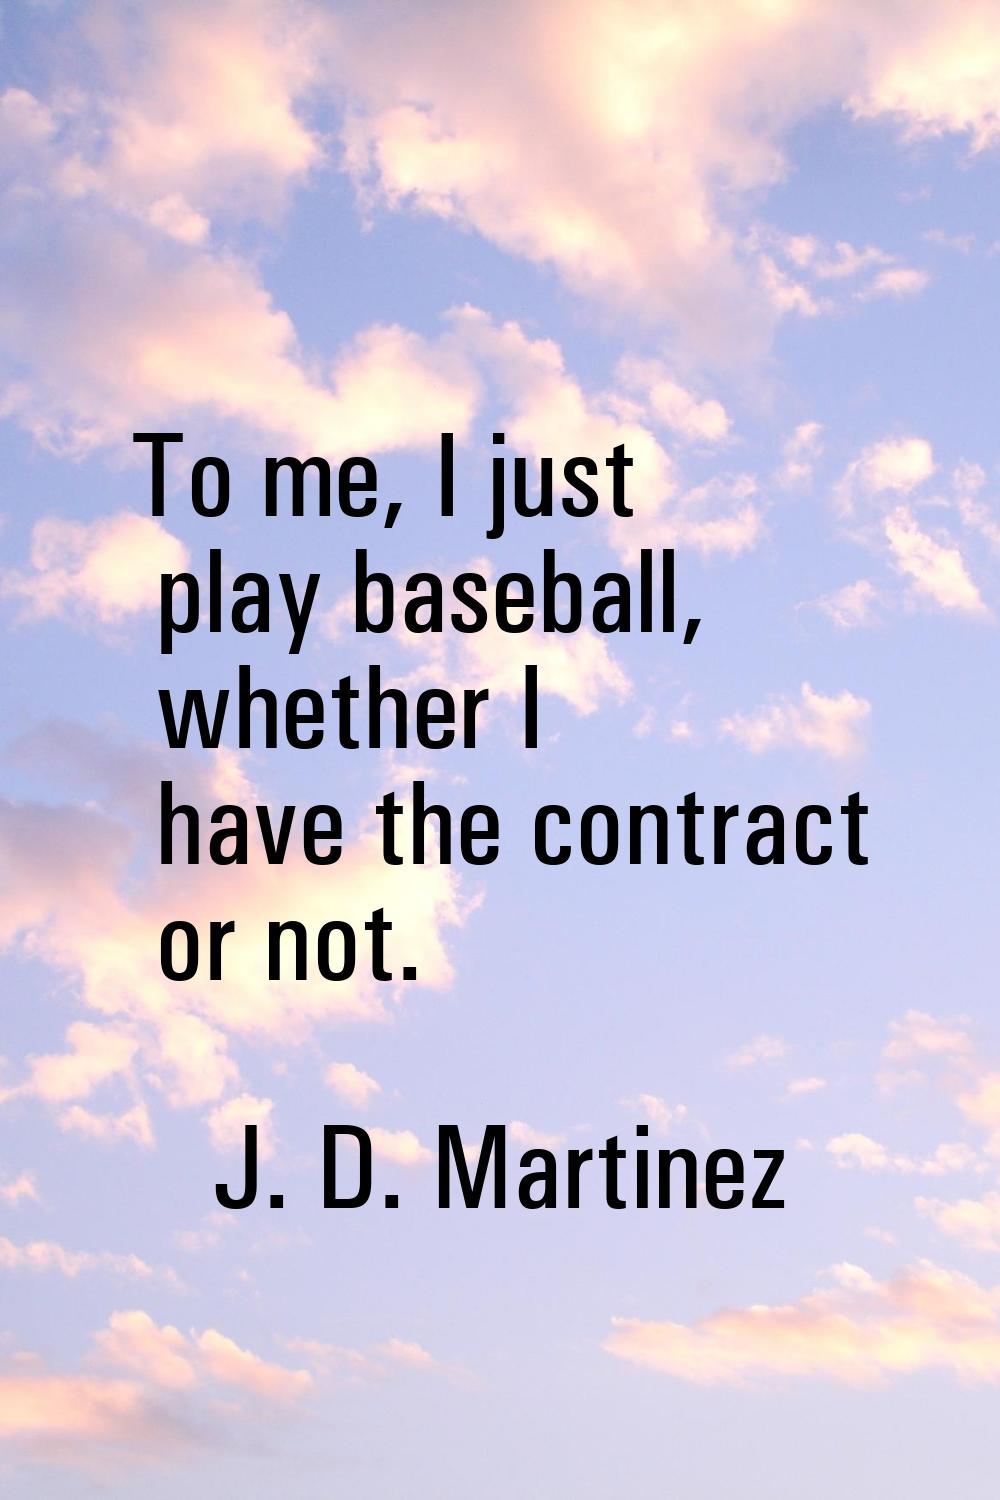 To me, I just play baseball, whether I have the contract or not.